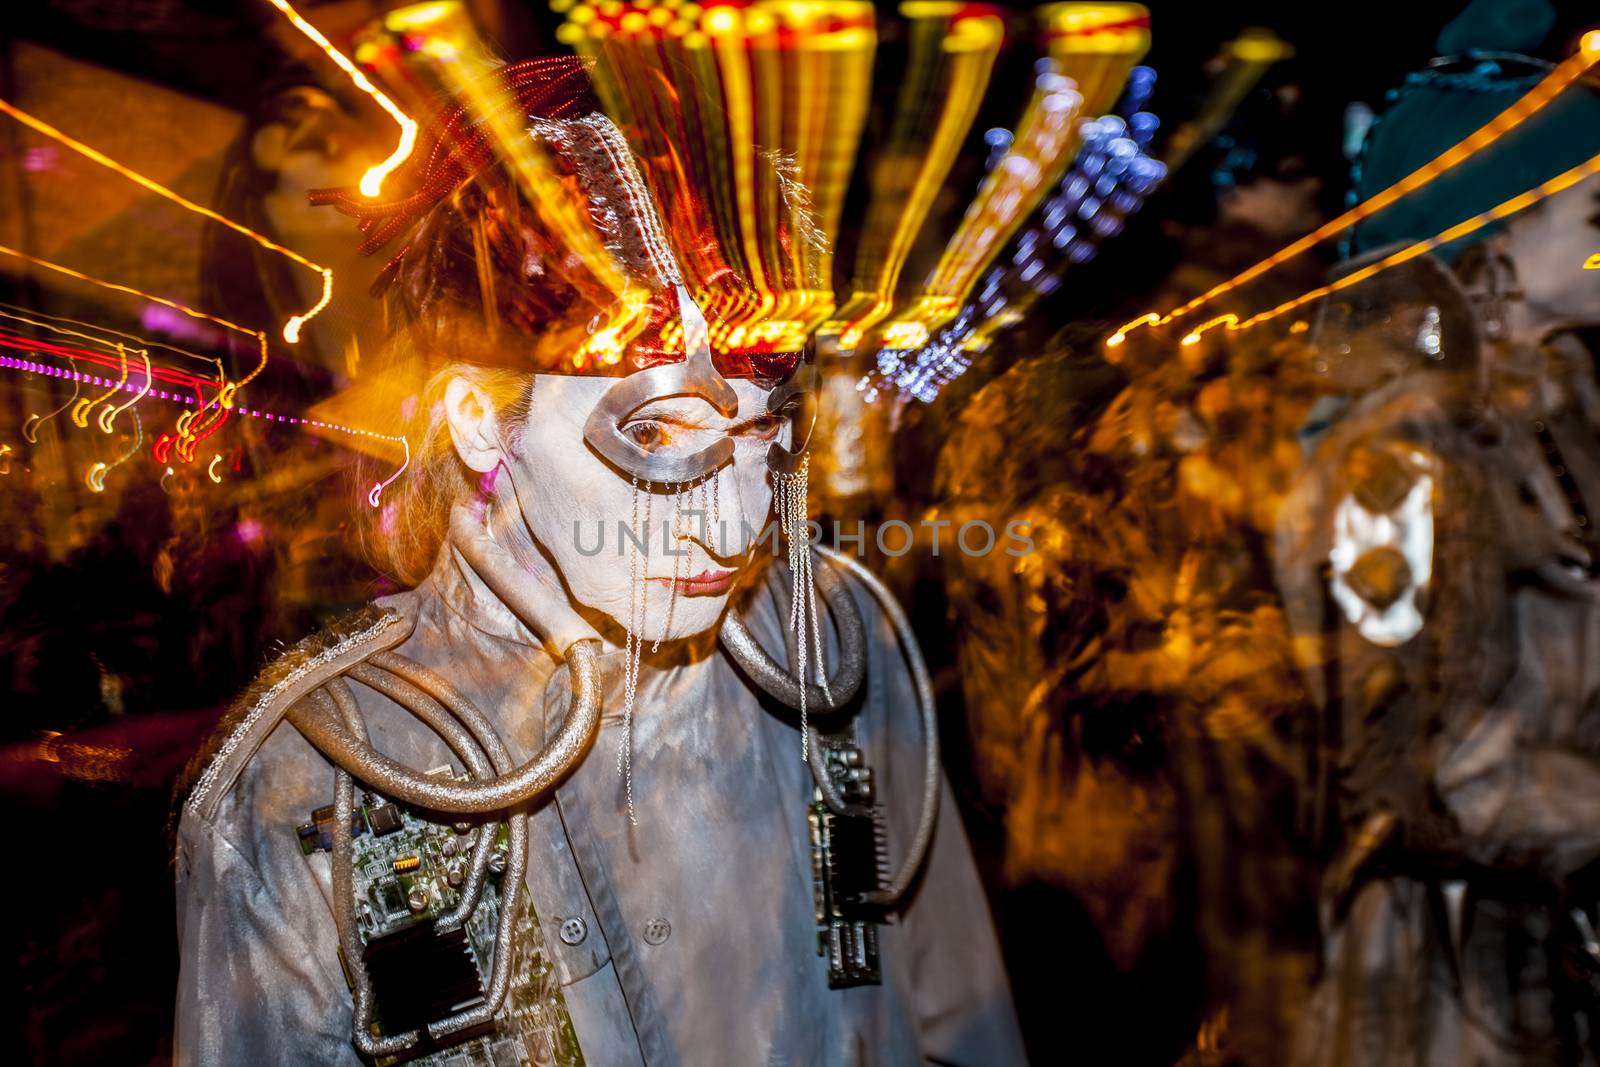 TUCSON, AZ/USA - NOVEMBER 09: Effect shot of unidentified performer at the All Souls Procession on November 09, 2014 in Tucson, AZ, USA.